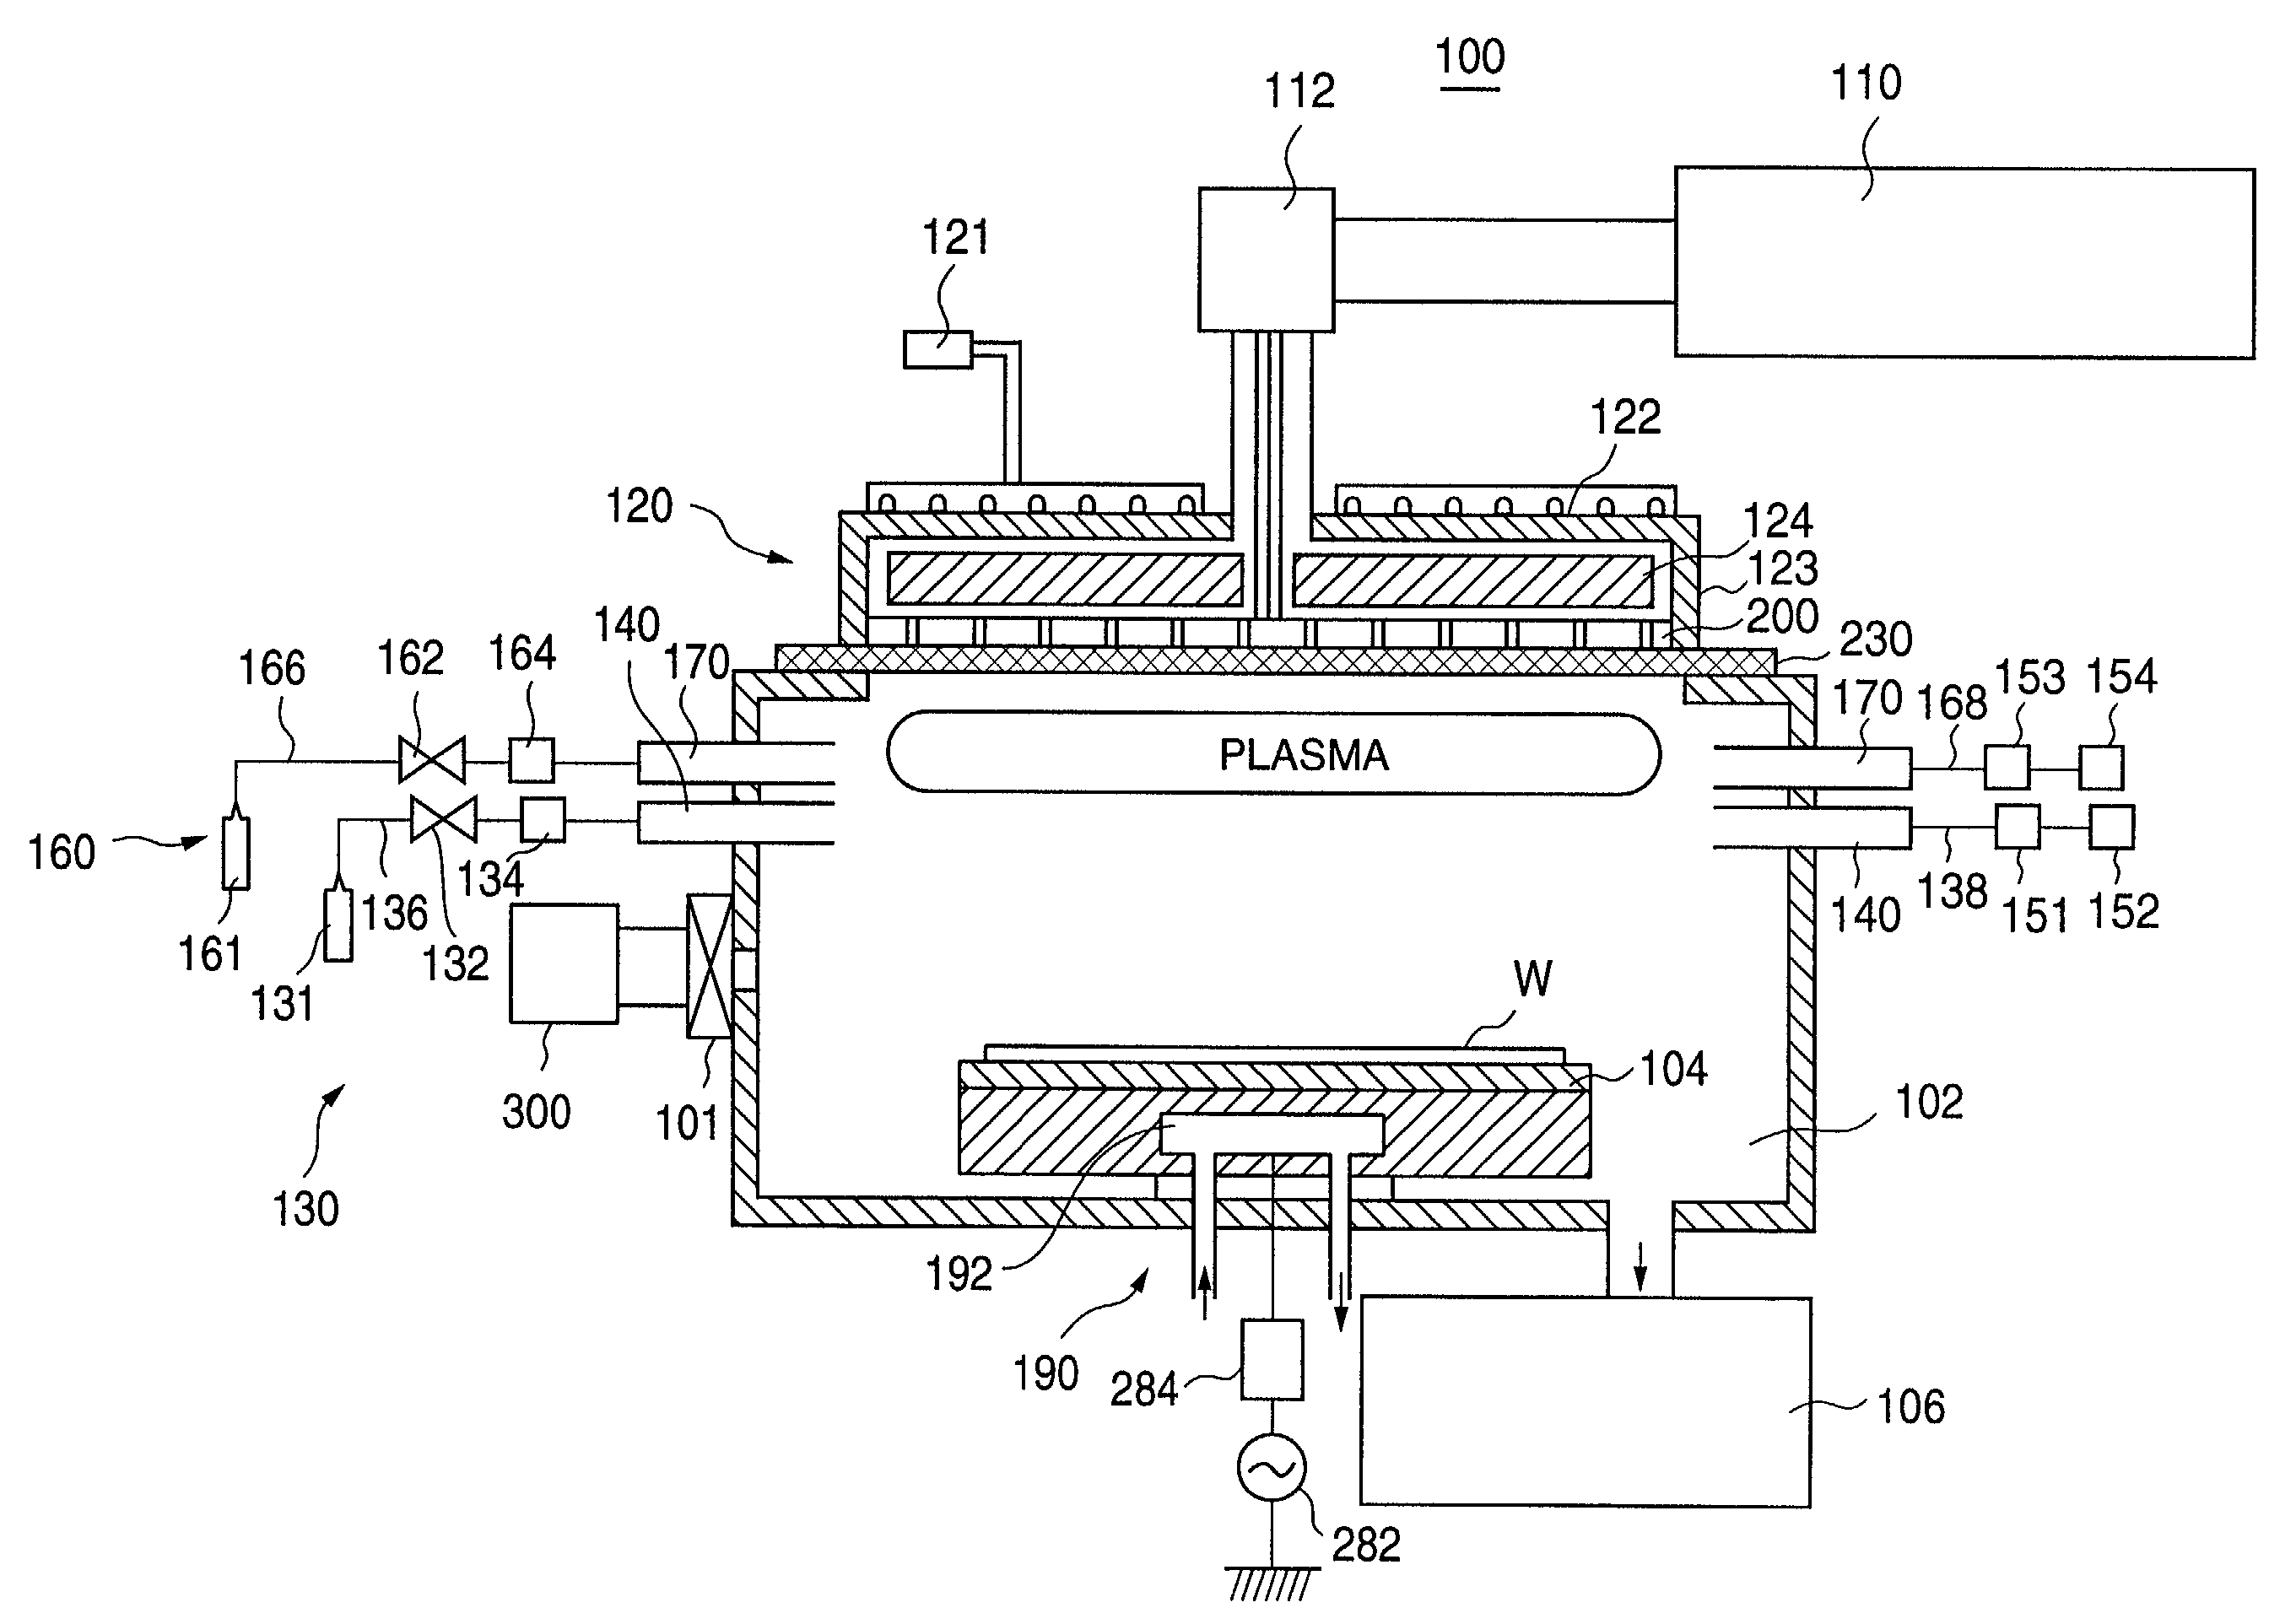 Plasma processing apparatus having an evacuating arrangement to evacuate gas from a gas-introducing part of a process chamber